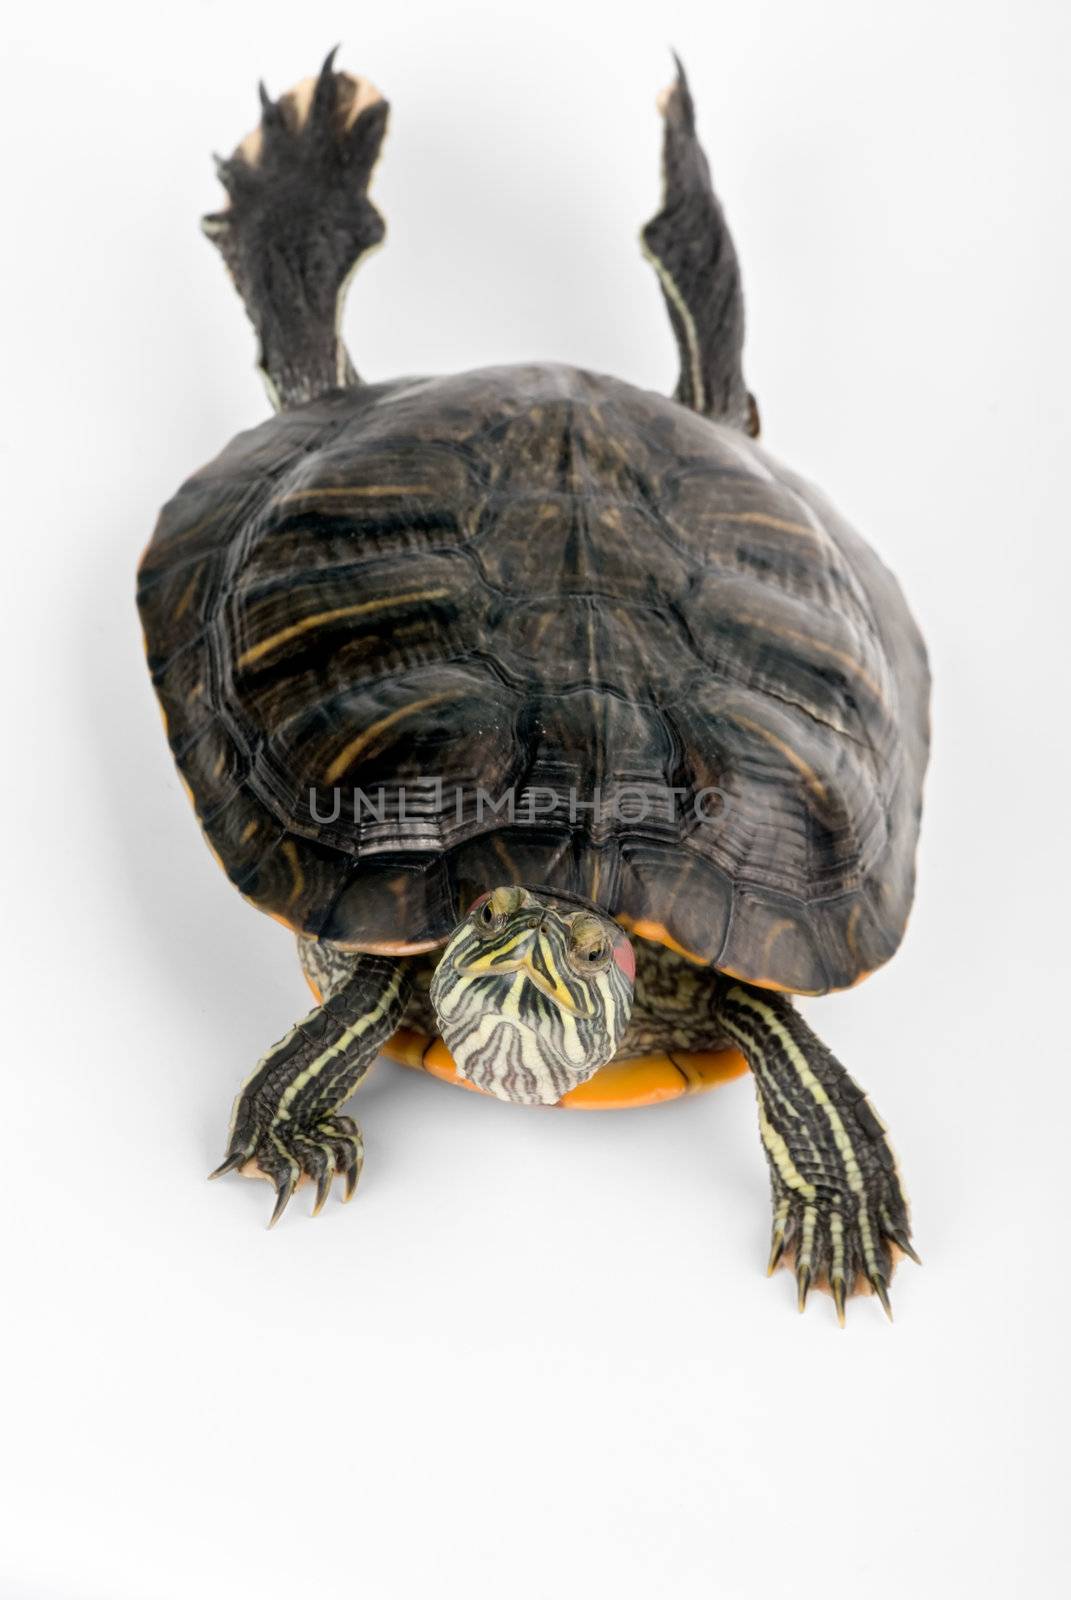 Turtle on white background by dgmata